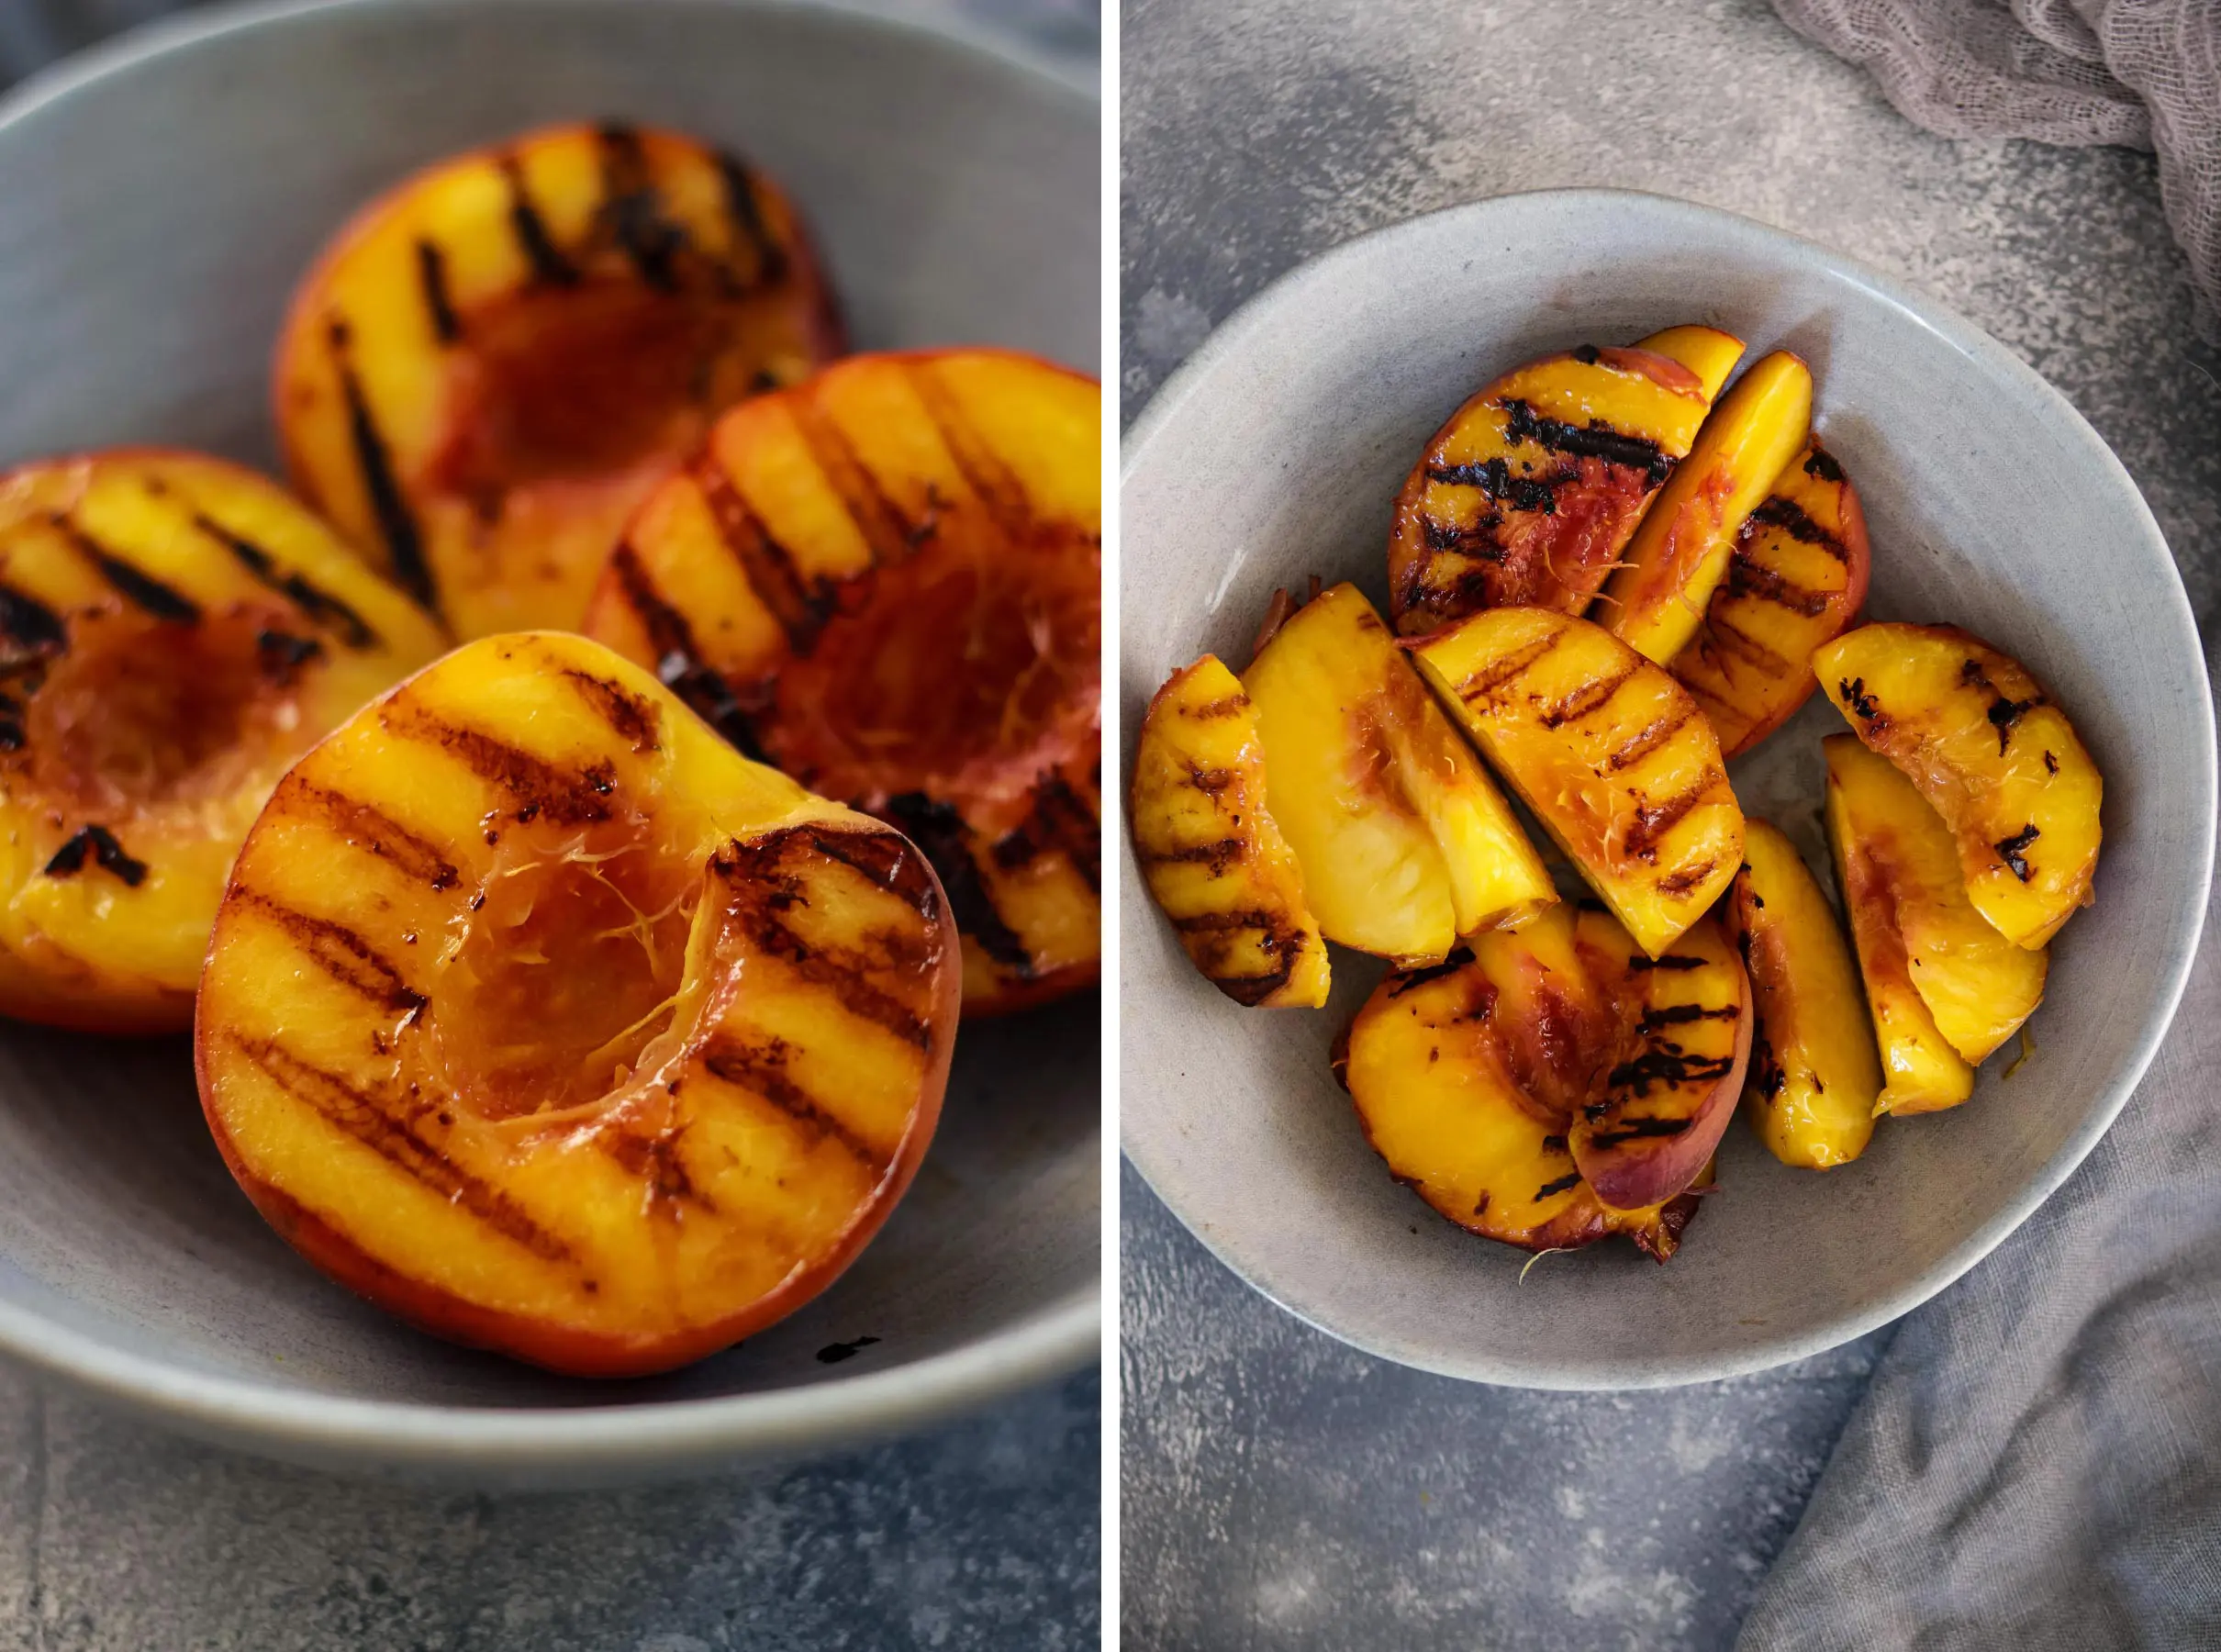 Grilled Peaches Next to Sliced Grilled Peaches in a Bowl